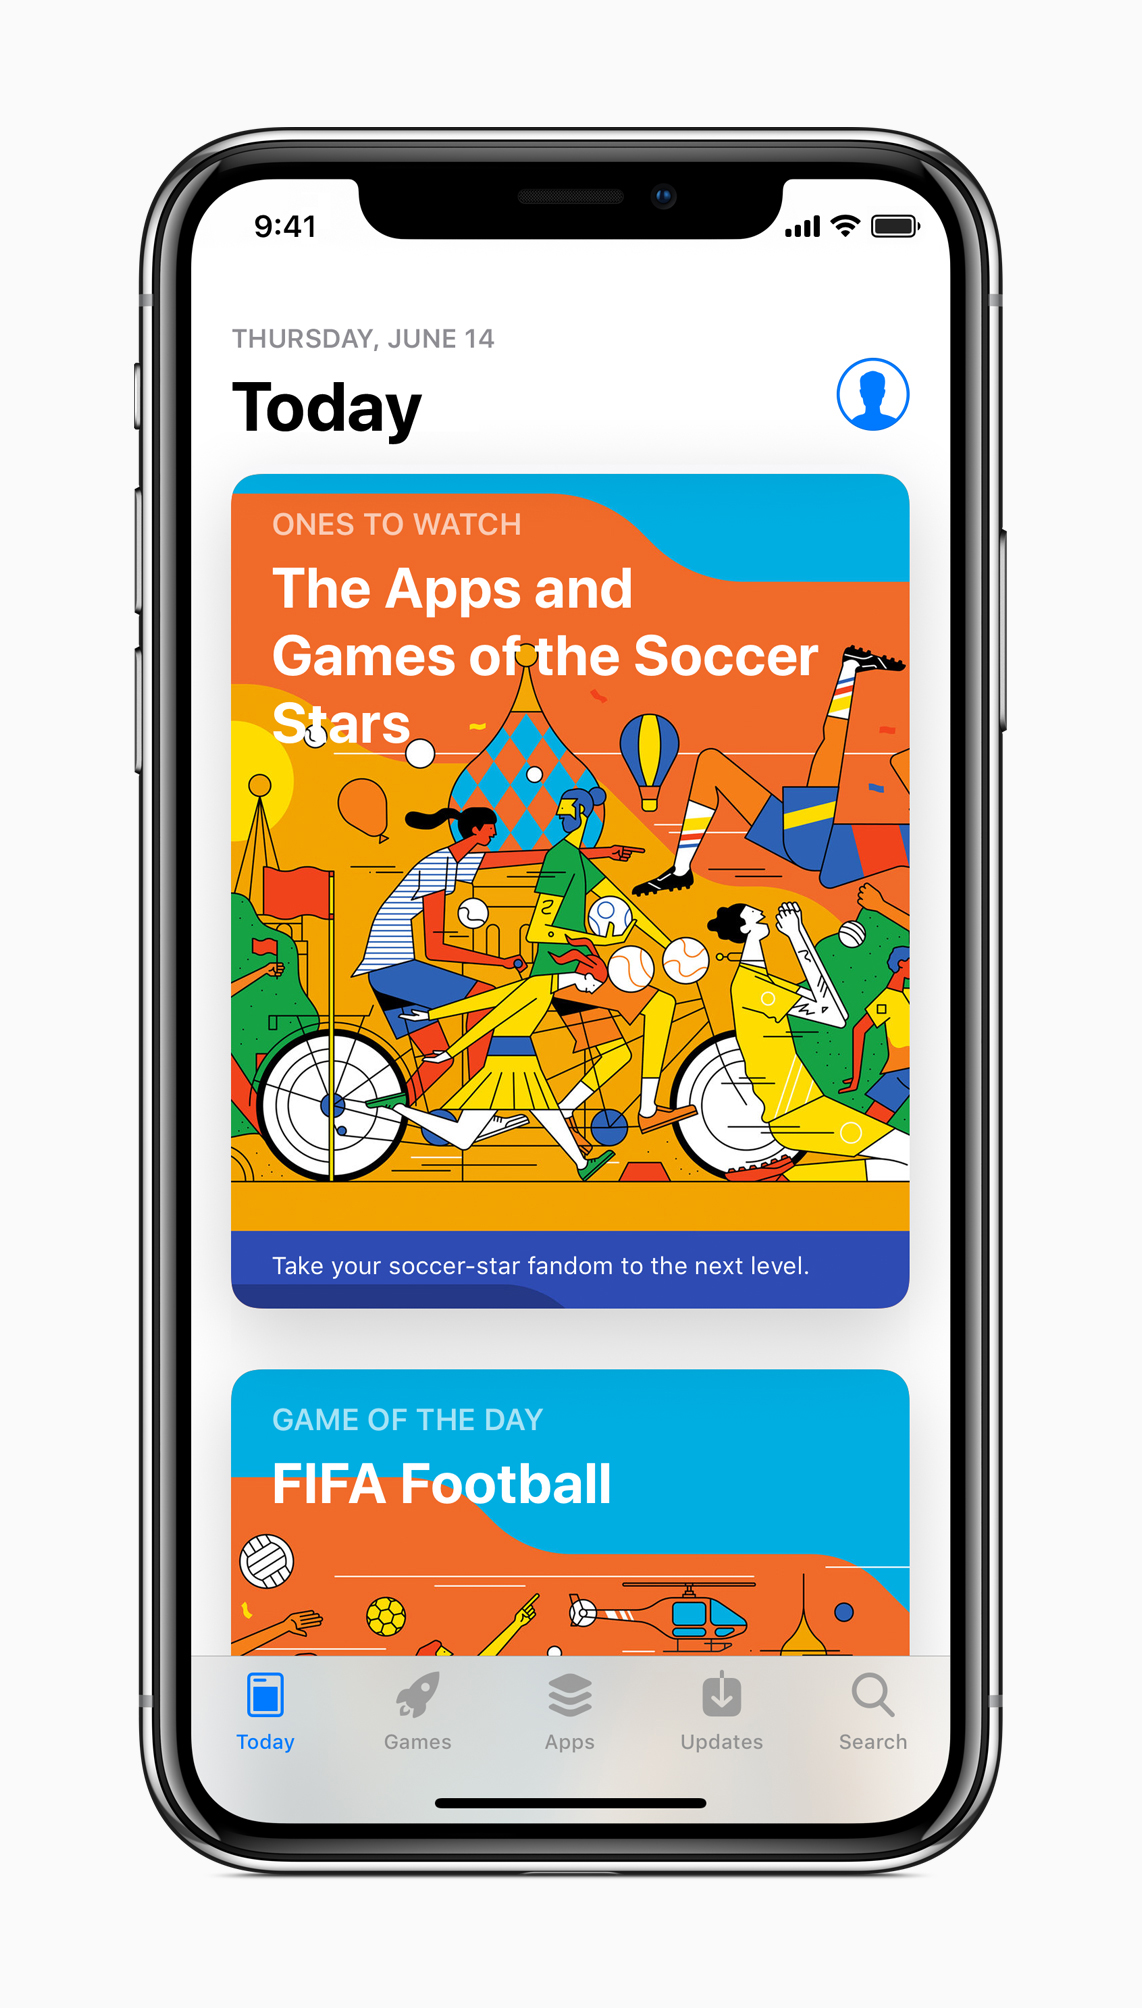 World Cup Content Coming to Siri, iOS apps, Apple TV, iBooks, and More